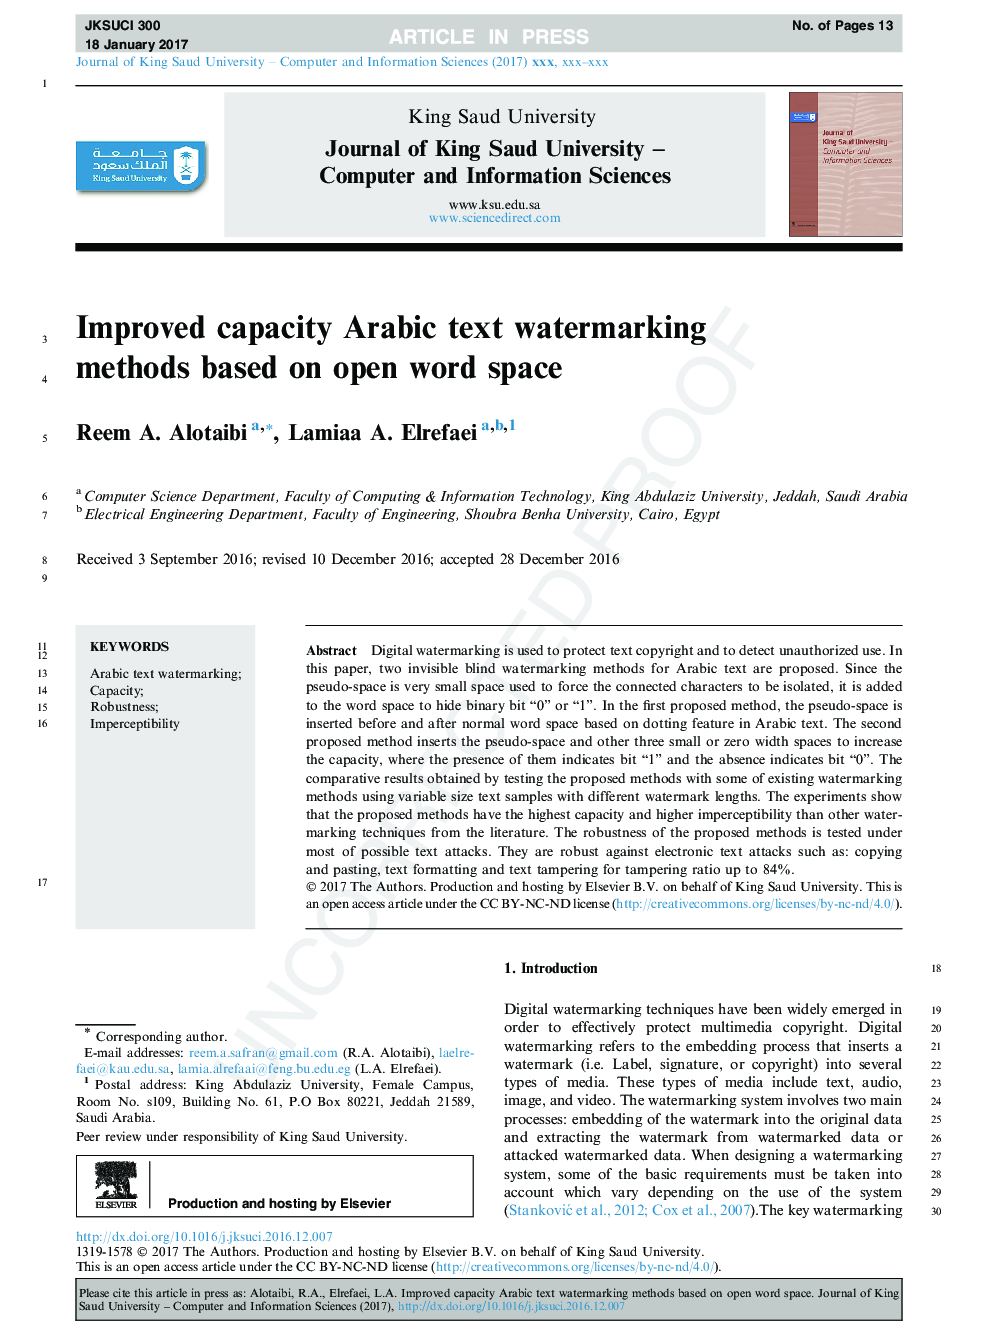 Improved capacity Arabic text watermarking methods based on open word space